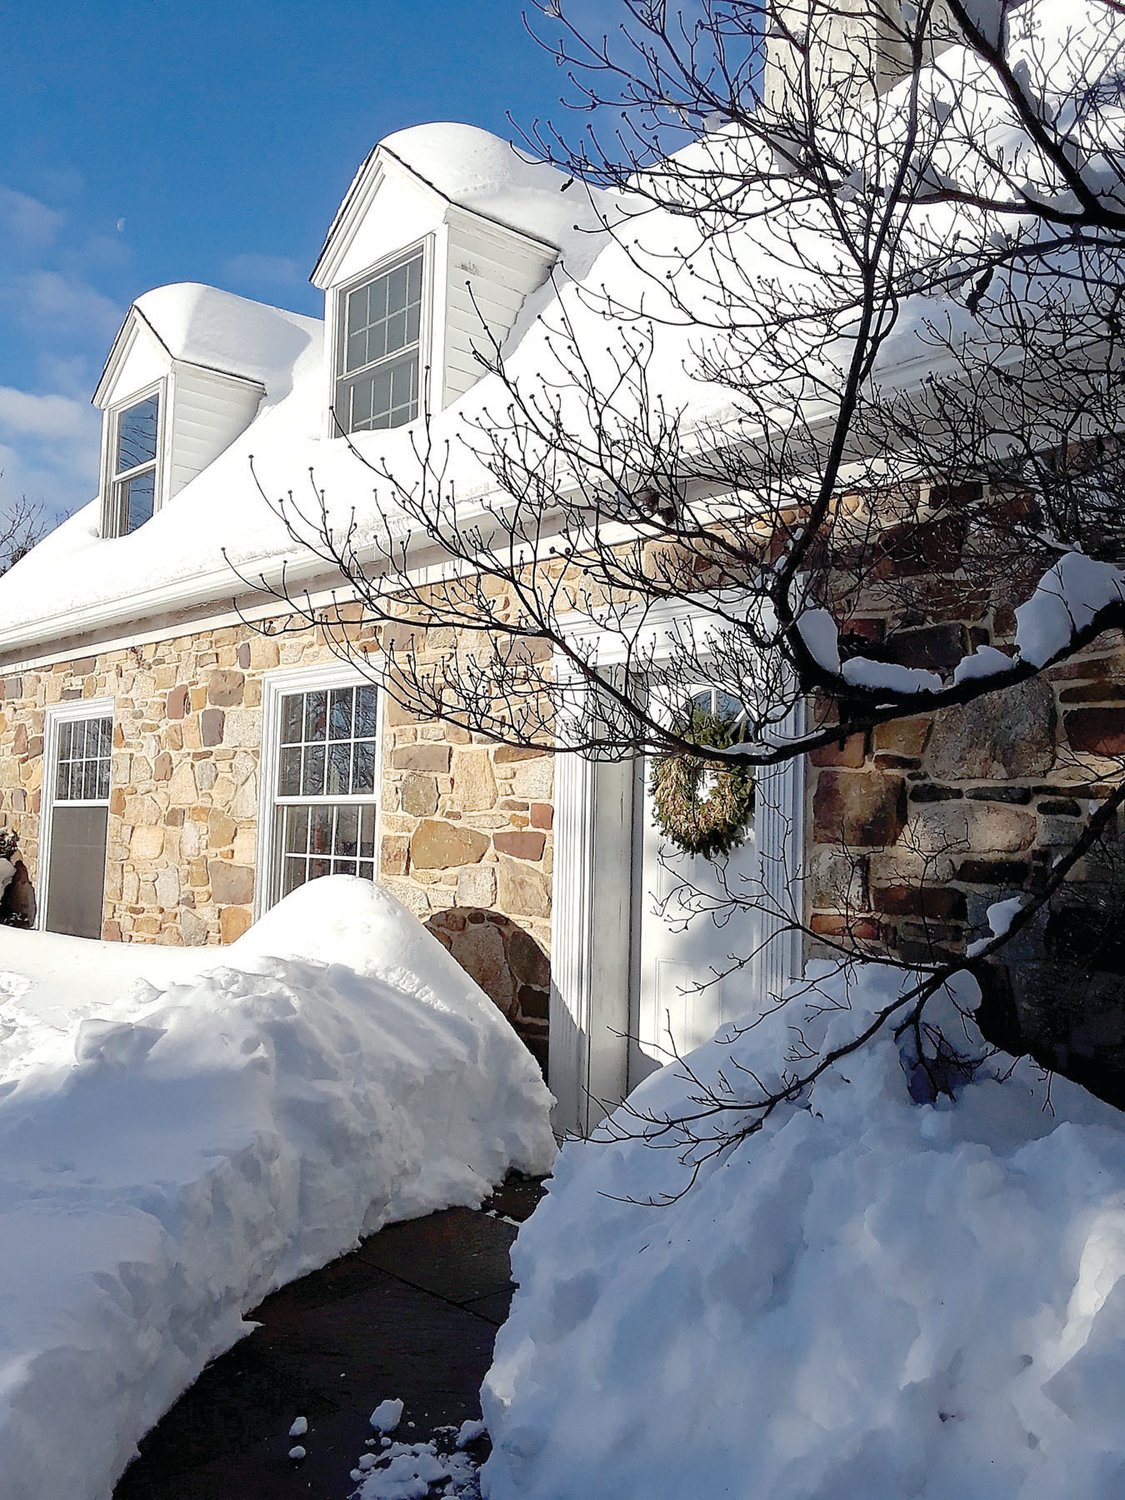 Virginia Derbyshire measured 31.2 inches of snow last February at her home on Springtown Hill. She shoveled her way out to her weather station every four hours.